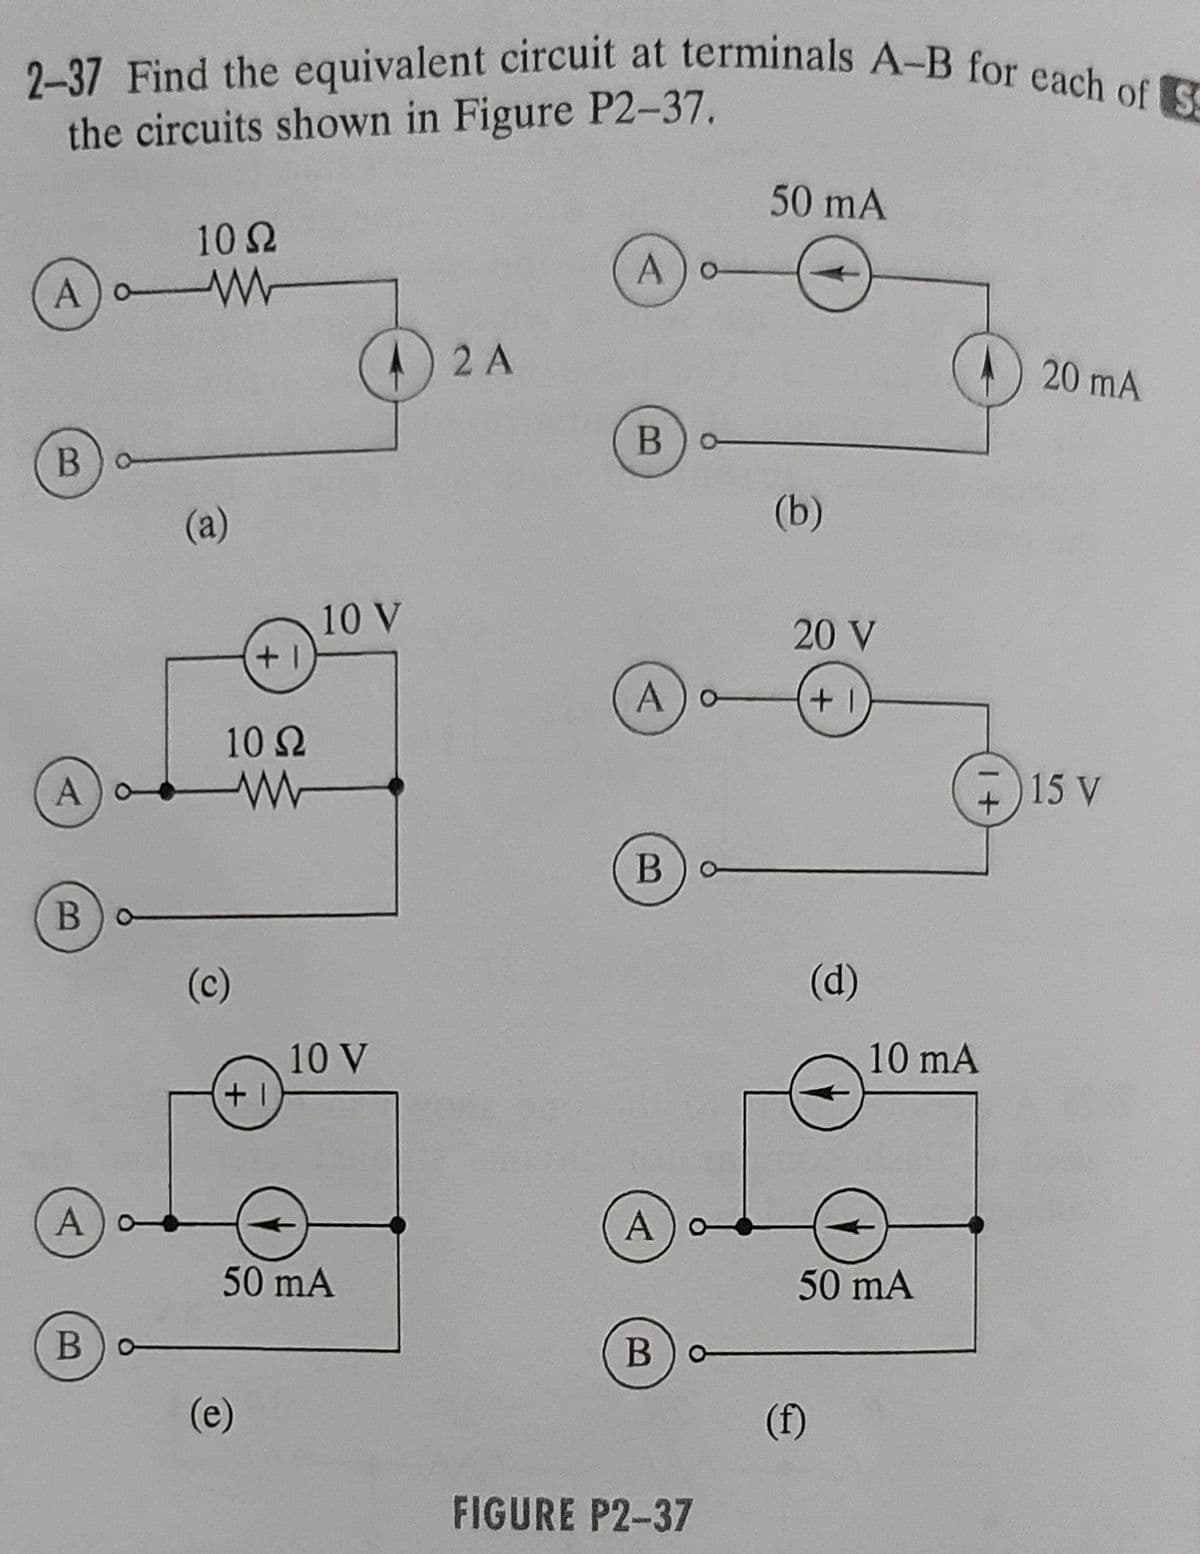 2-37 Find the equivalent circuit at terminals A-B for each of S
the circuits shown in Figure P2-37.
A) W
o
B)o-
A
B
A
10 S2
www
Bo
(a)
10 Ω
www
(c)
+1
+1
(e)
10 V
10 V
50 mA
2 A
A) o
Bo
A) o
B) o
A) o
А
Bo
FIGURE P2-37
50 mA
(b)
20 V
+1
(d)
(f)
50 mA
+
10 mA
20 mA
15 V